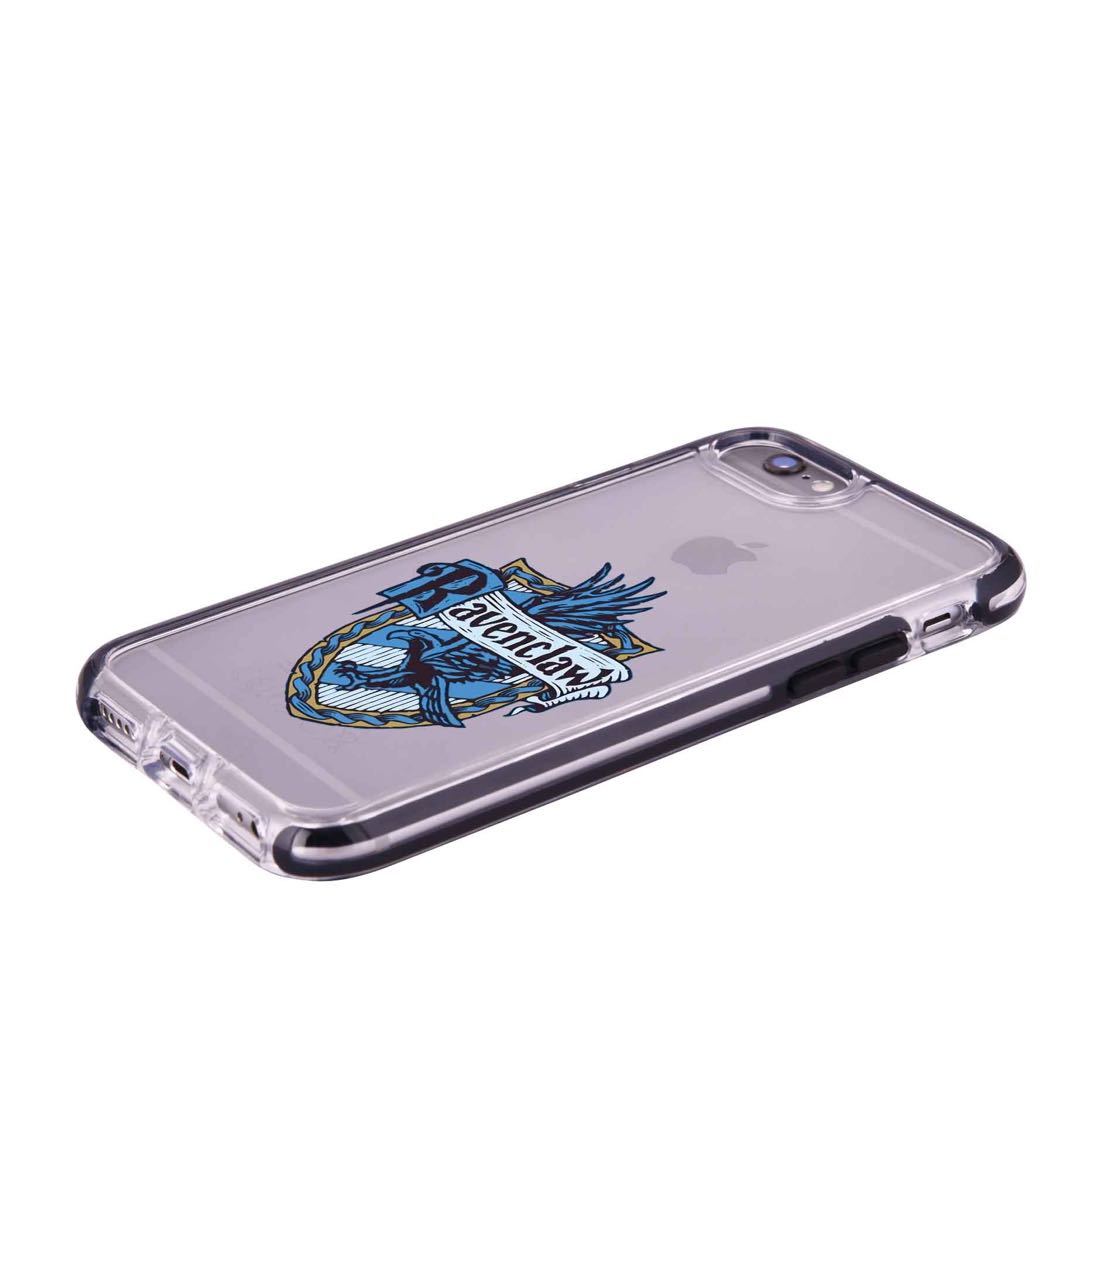 Crest Ravenclaw - Extreme Phone Case for iPhone 6S